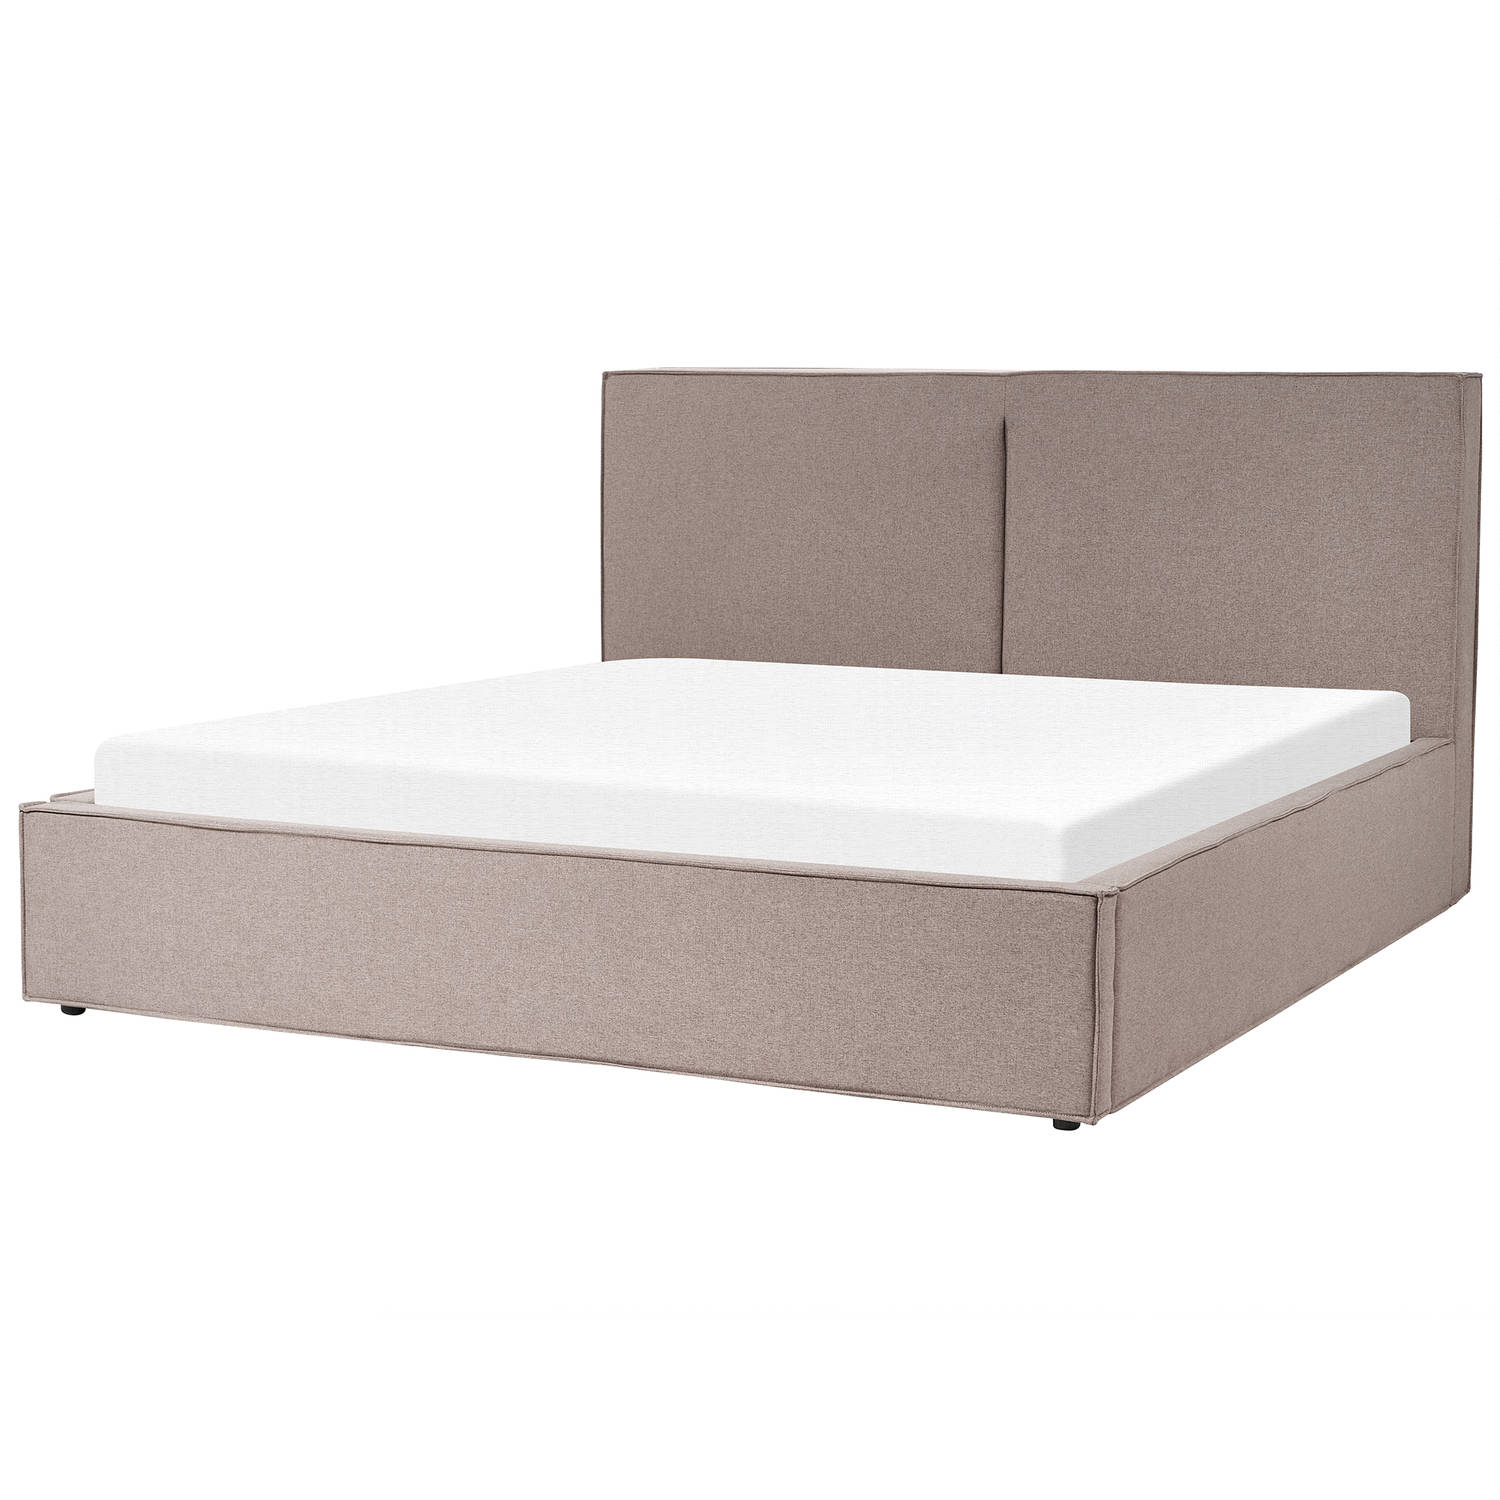 MOISSAC - Bed - Taupe - 180 x 200 cm - Polyester